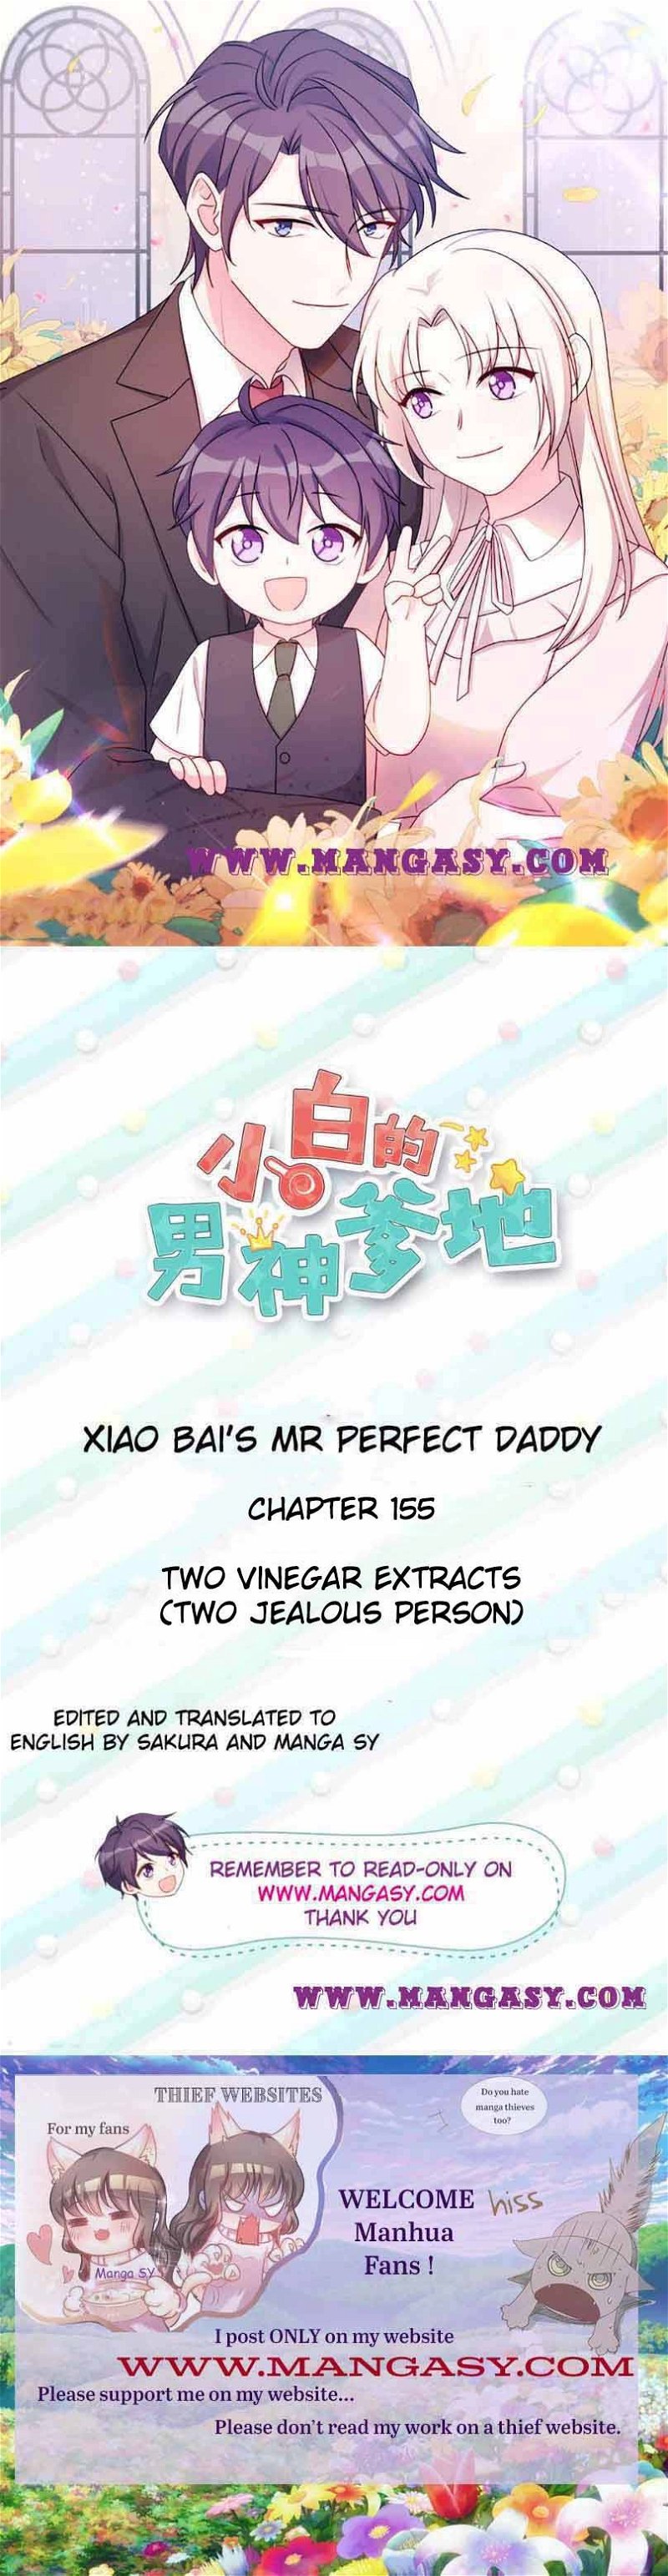 Xiao Bai’s father is a wonderful person Chapter 155 - Page 0